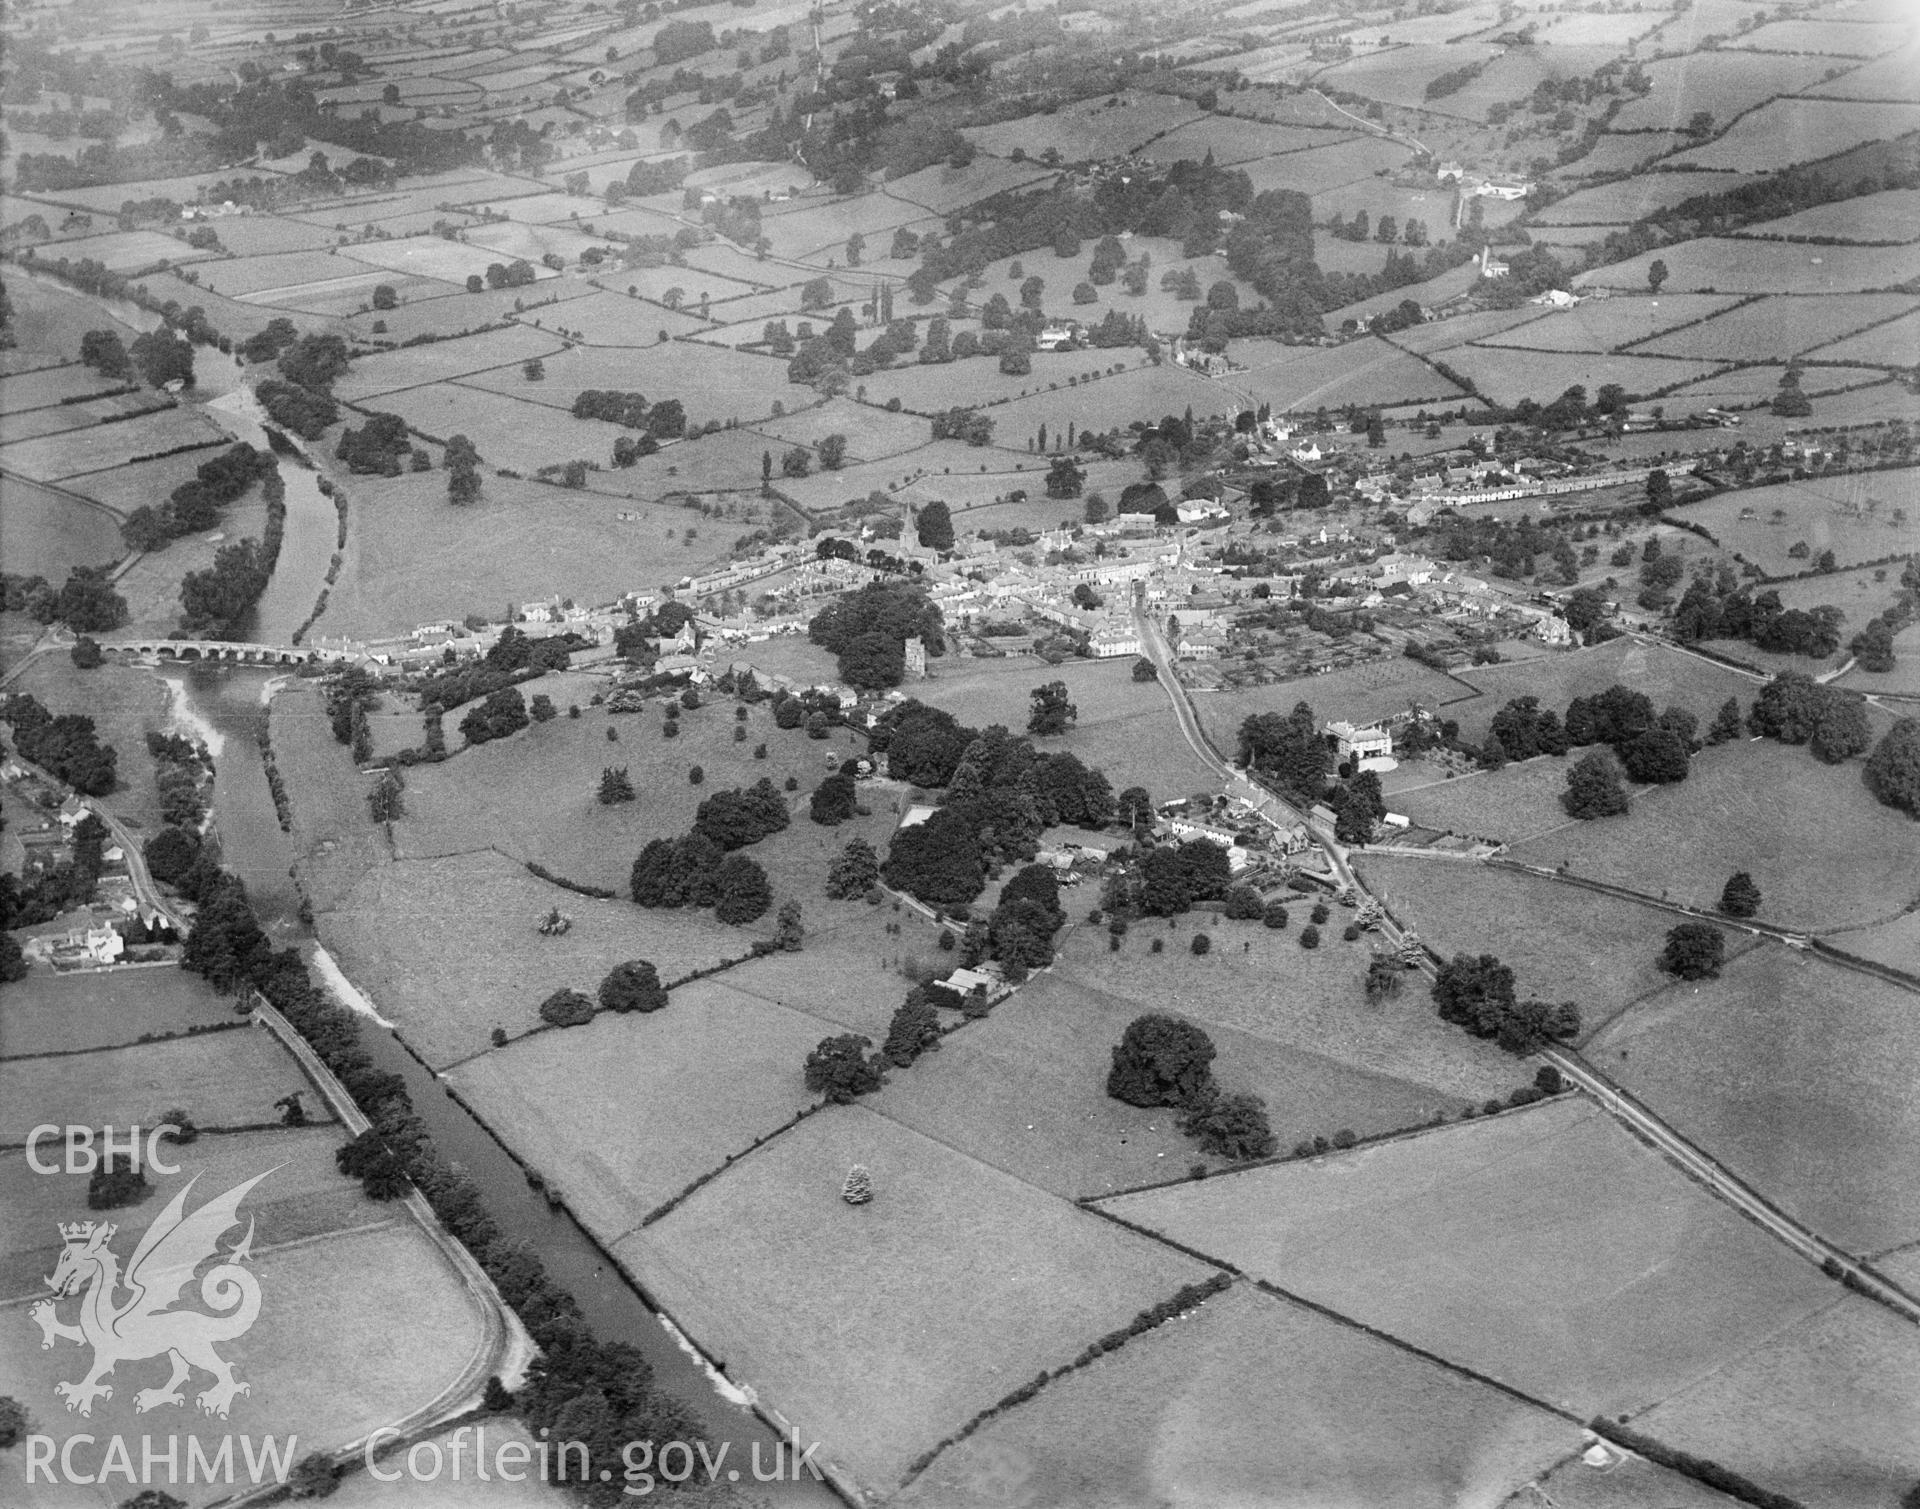 General view of Crickhowell, oblique aerial view. 5?x4? black and white glass plate negative.